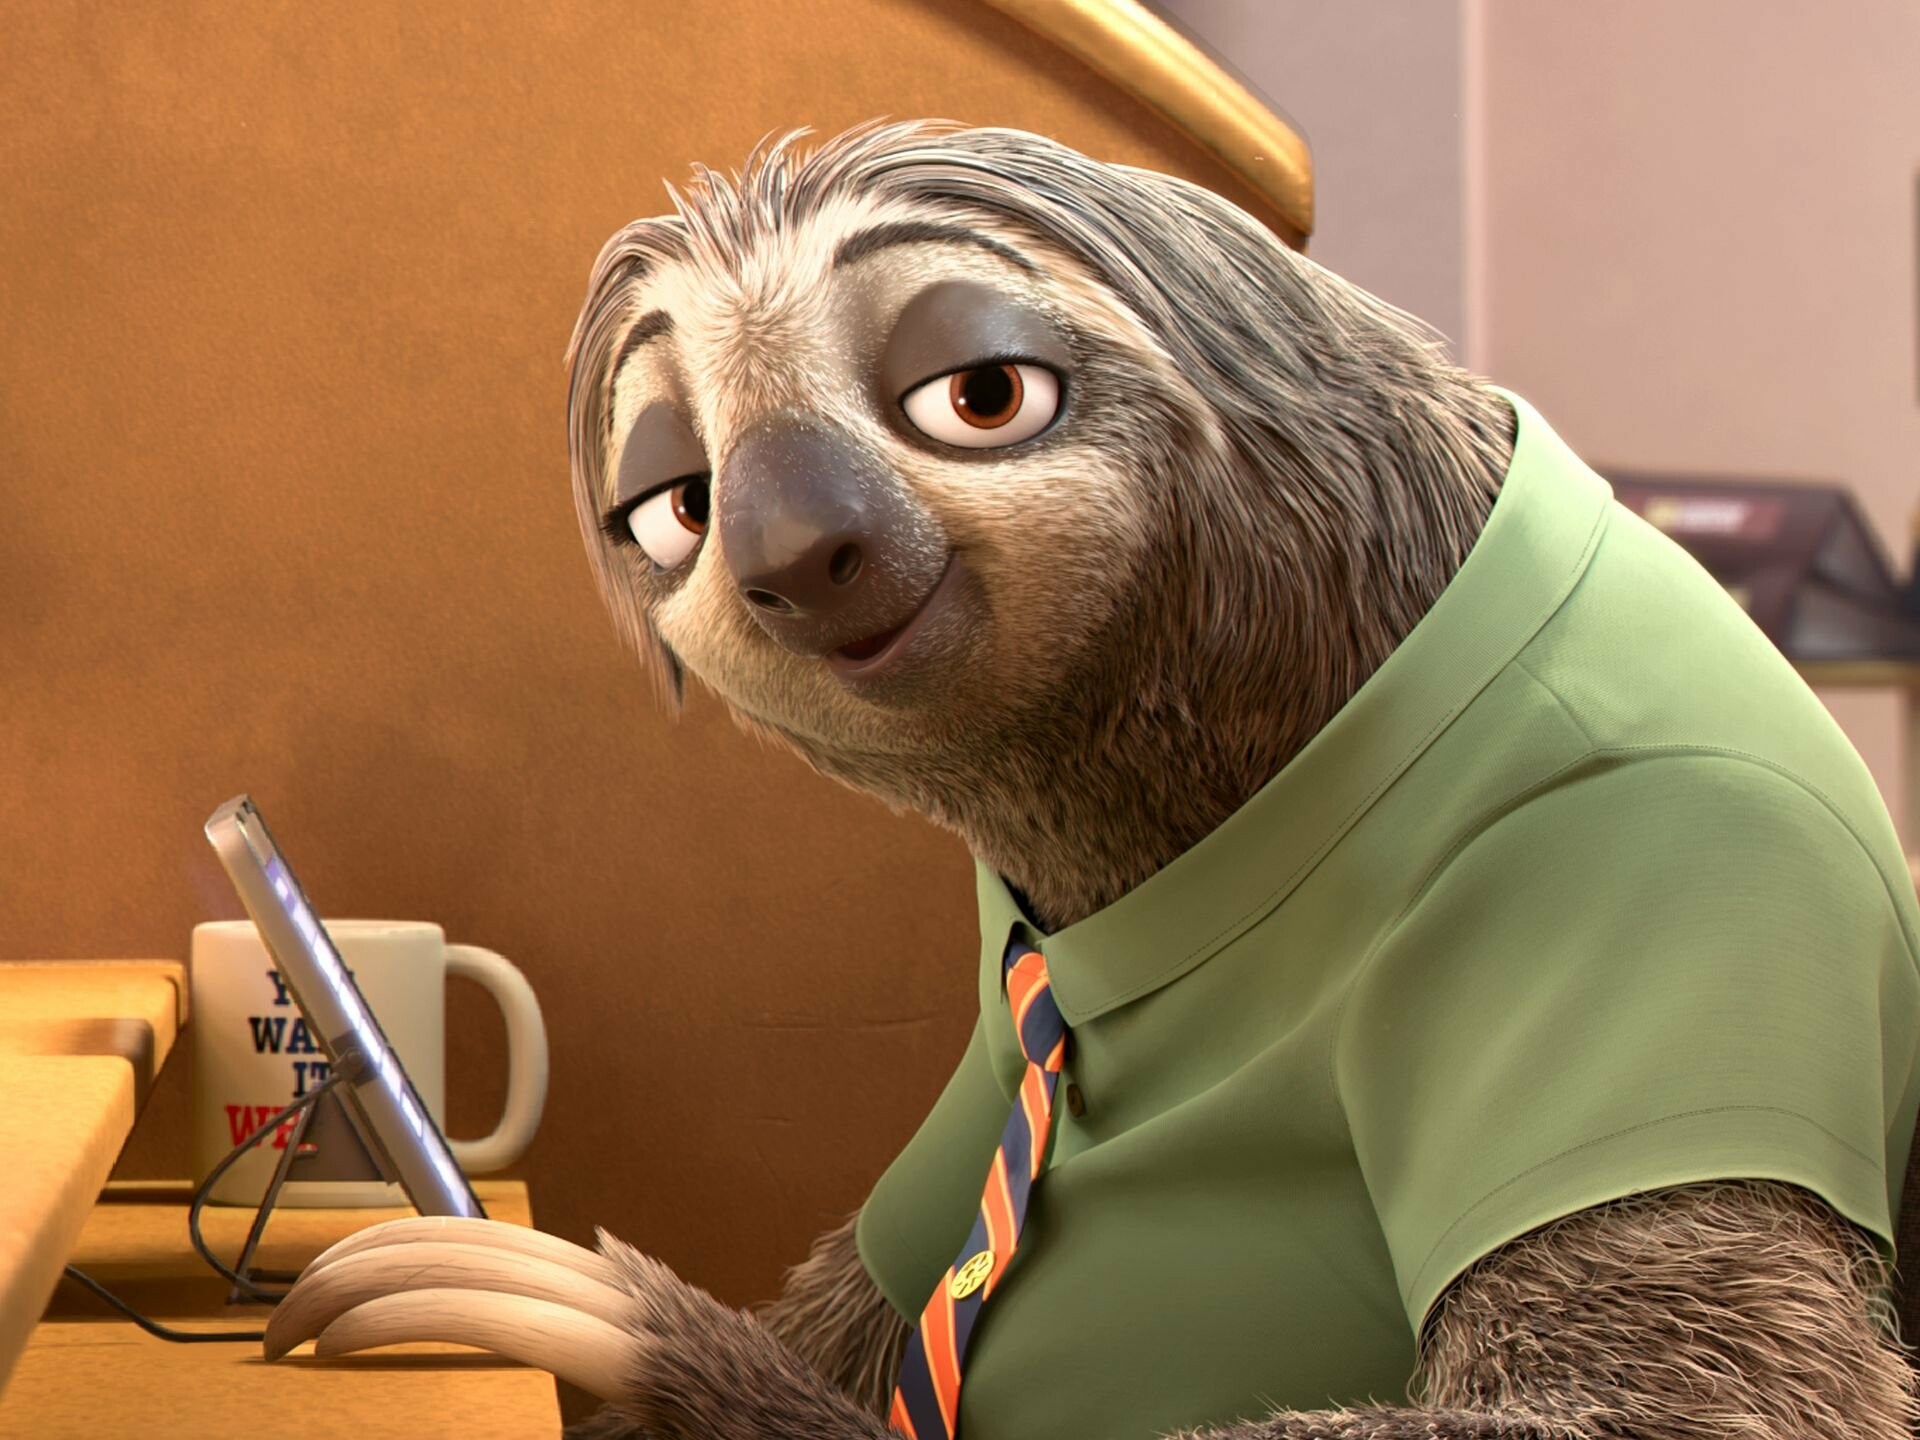 Zootopia: Raymond S. Persi as Flash, the "fastest" three-toed sloth in the DMV. 1920x1440 HD Background.